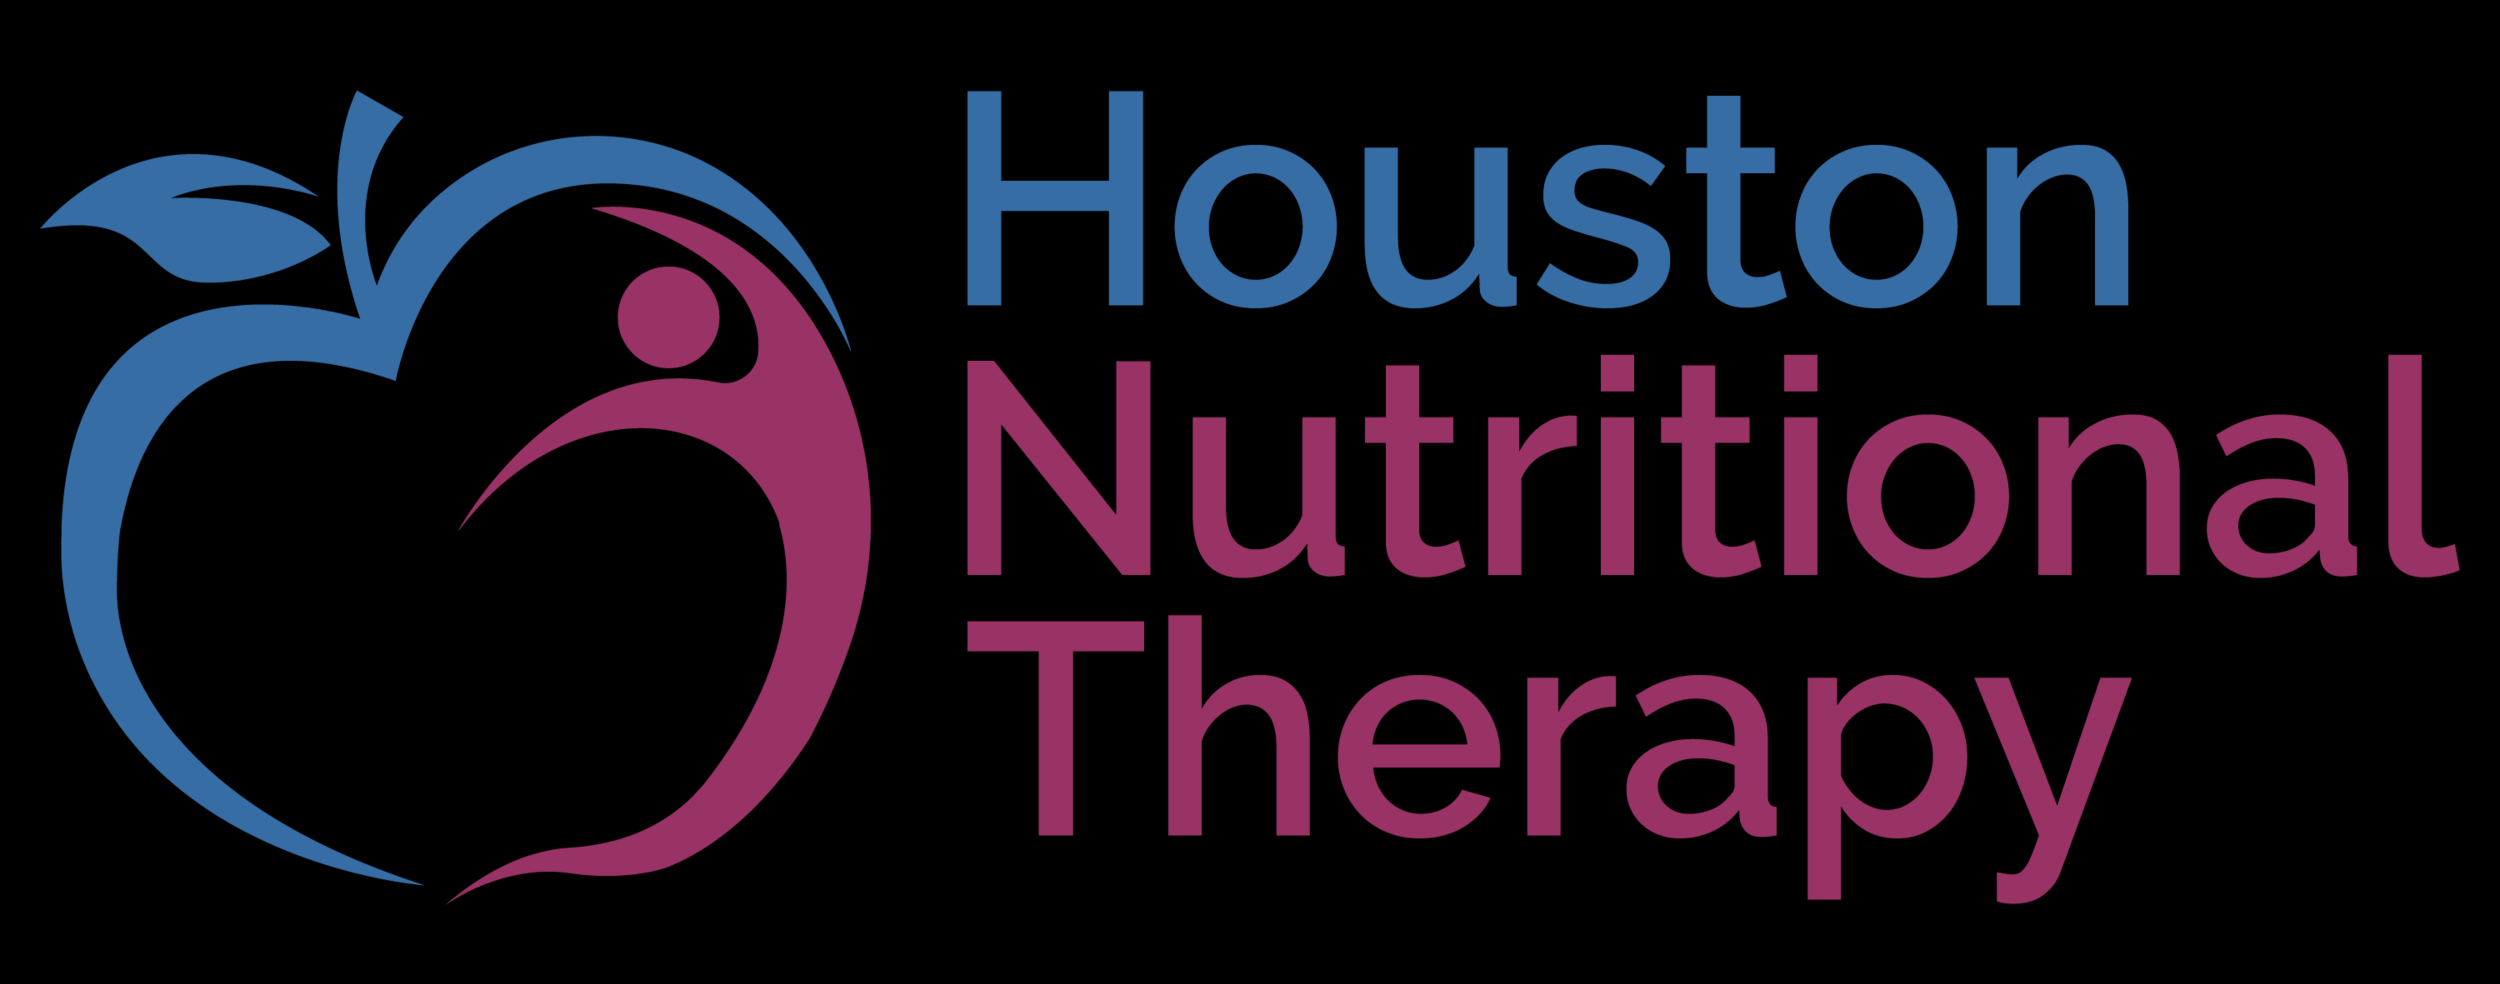 Houston Nutritional Therapy